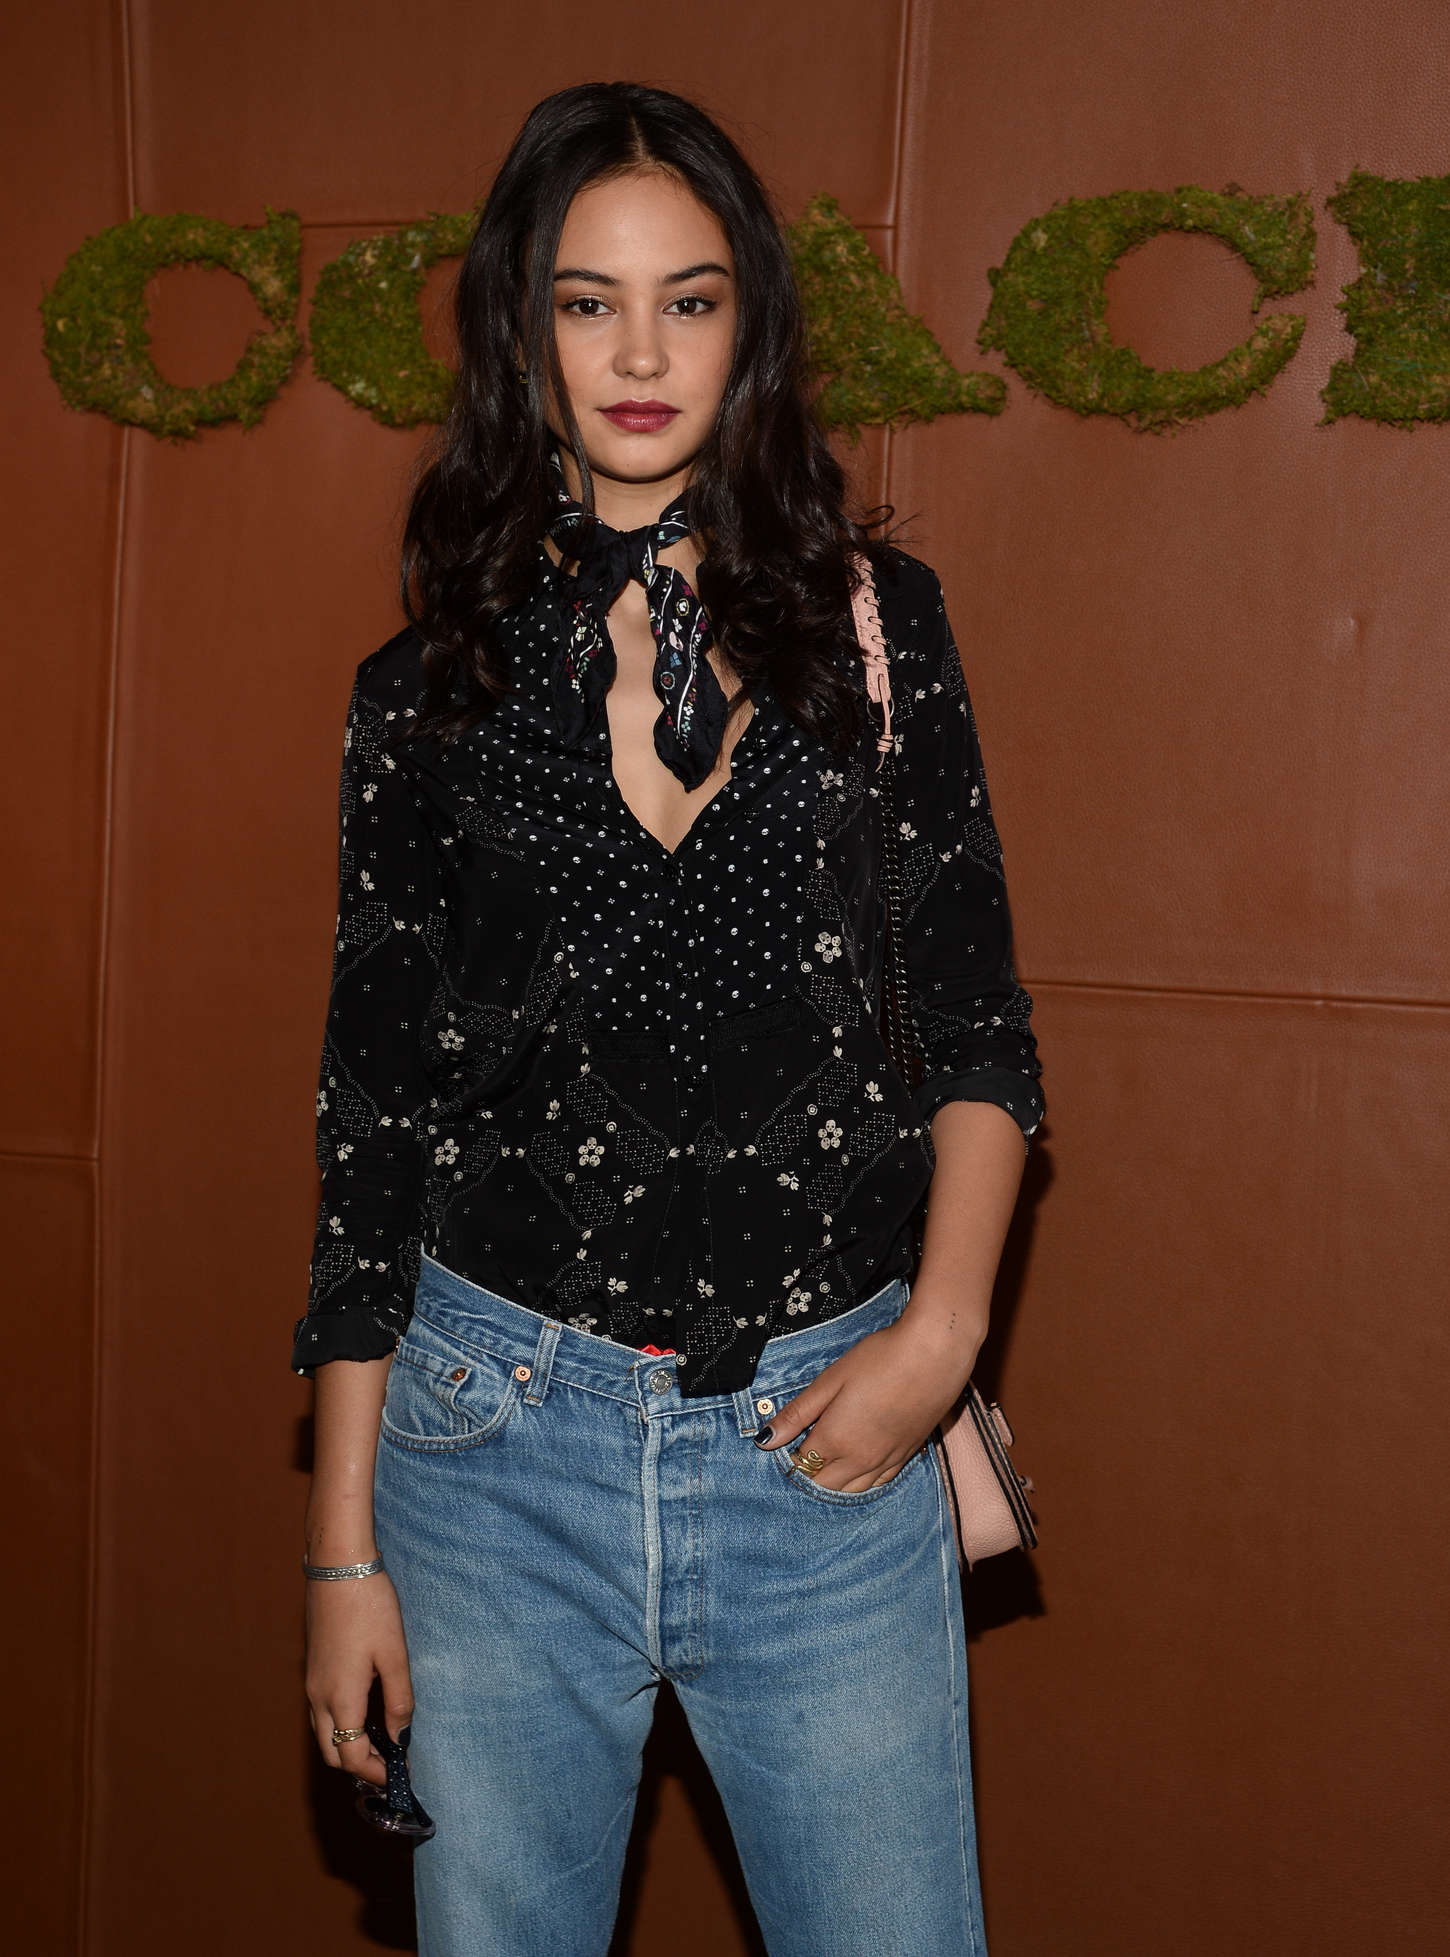 Courtney Eaton Annual Coach and Friends of the High Line Summer Party in New York